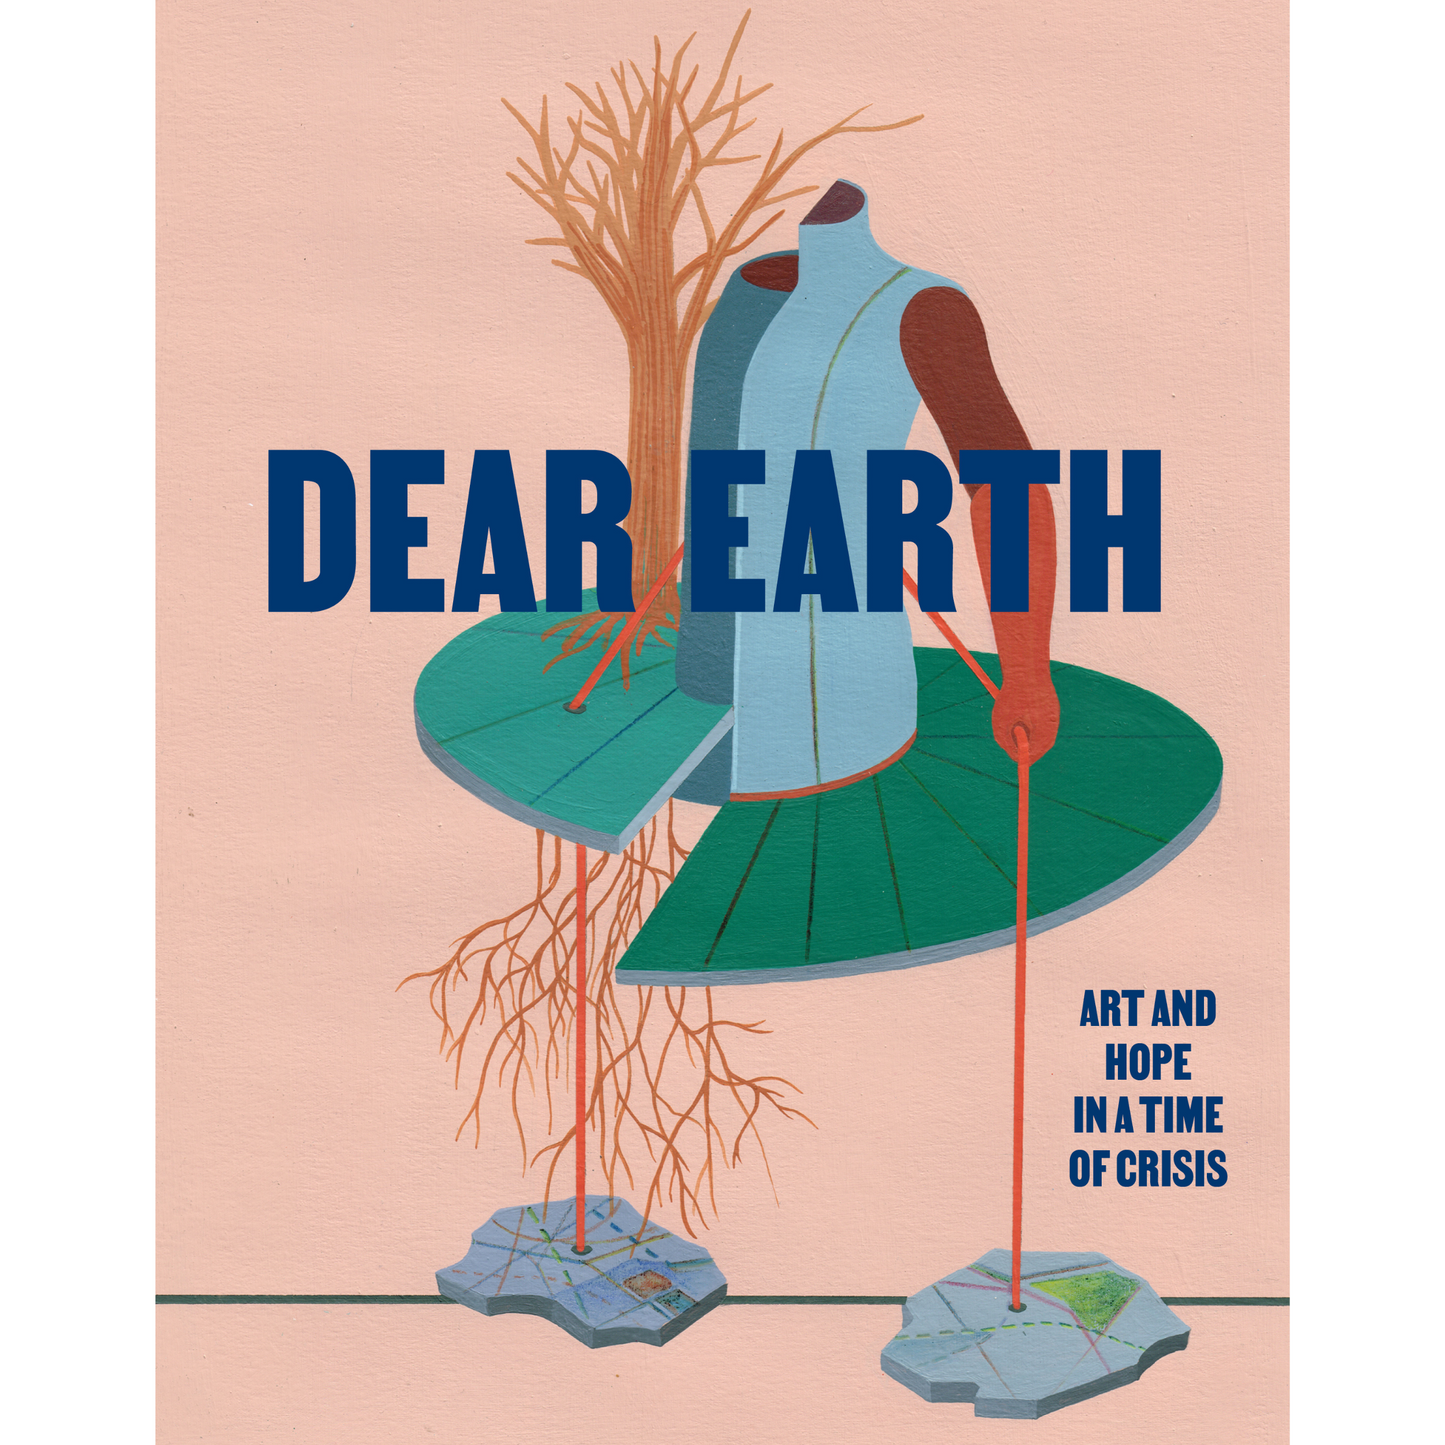 Dear Earth catalogue front cover with a light pink background